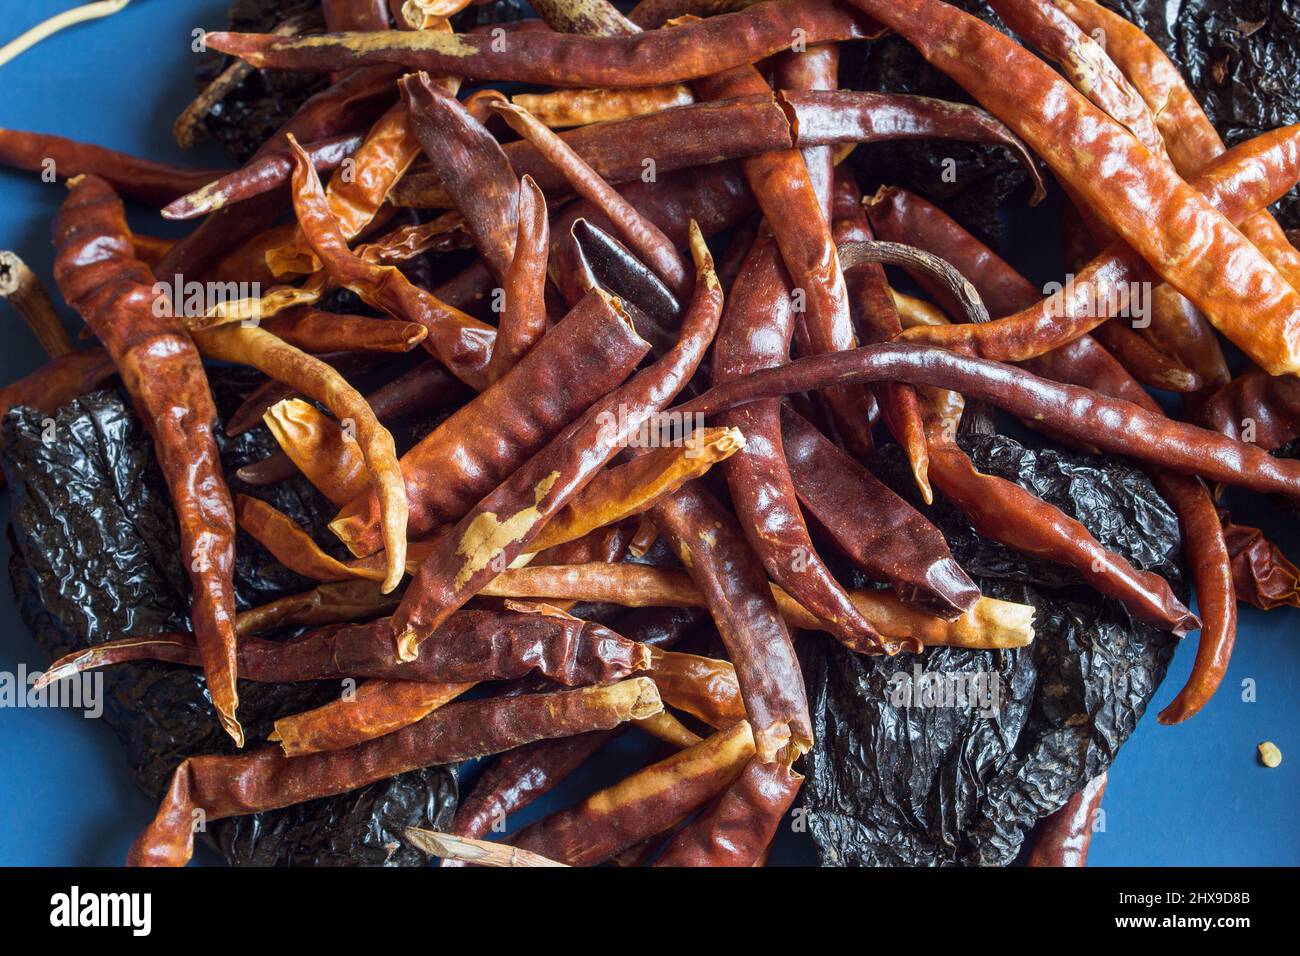 A pile of dehydrated chili peppers with dried ñoras peppers on a textured blue studio background. Stock Photo